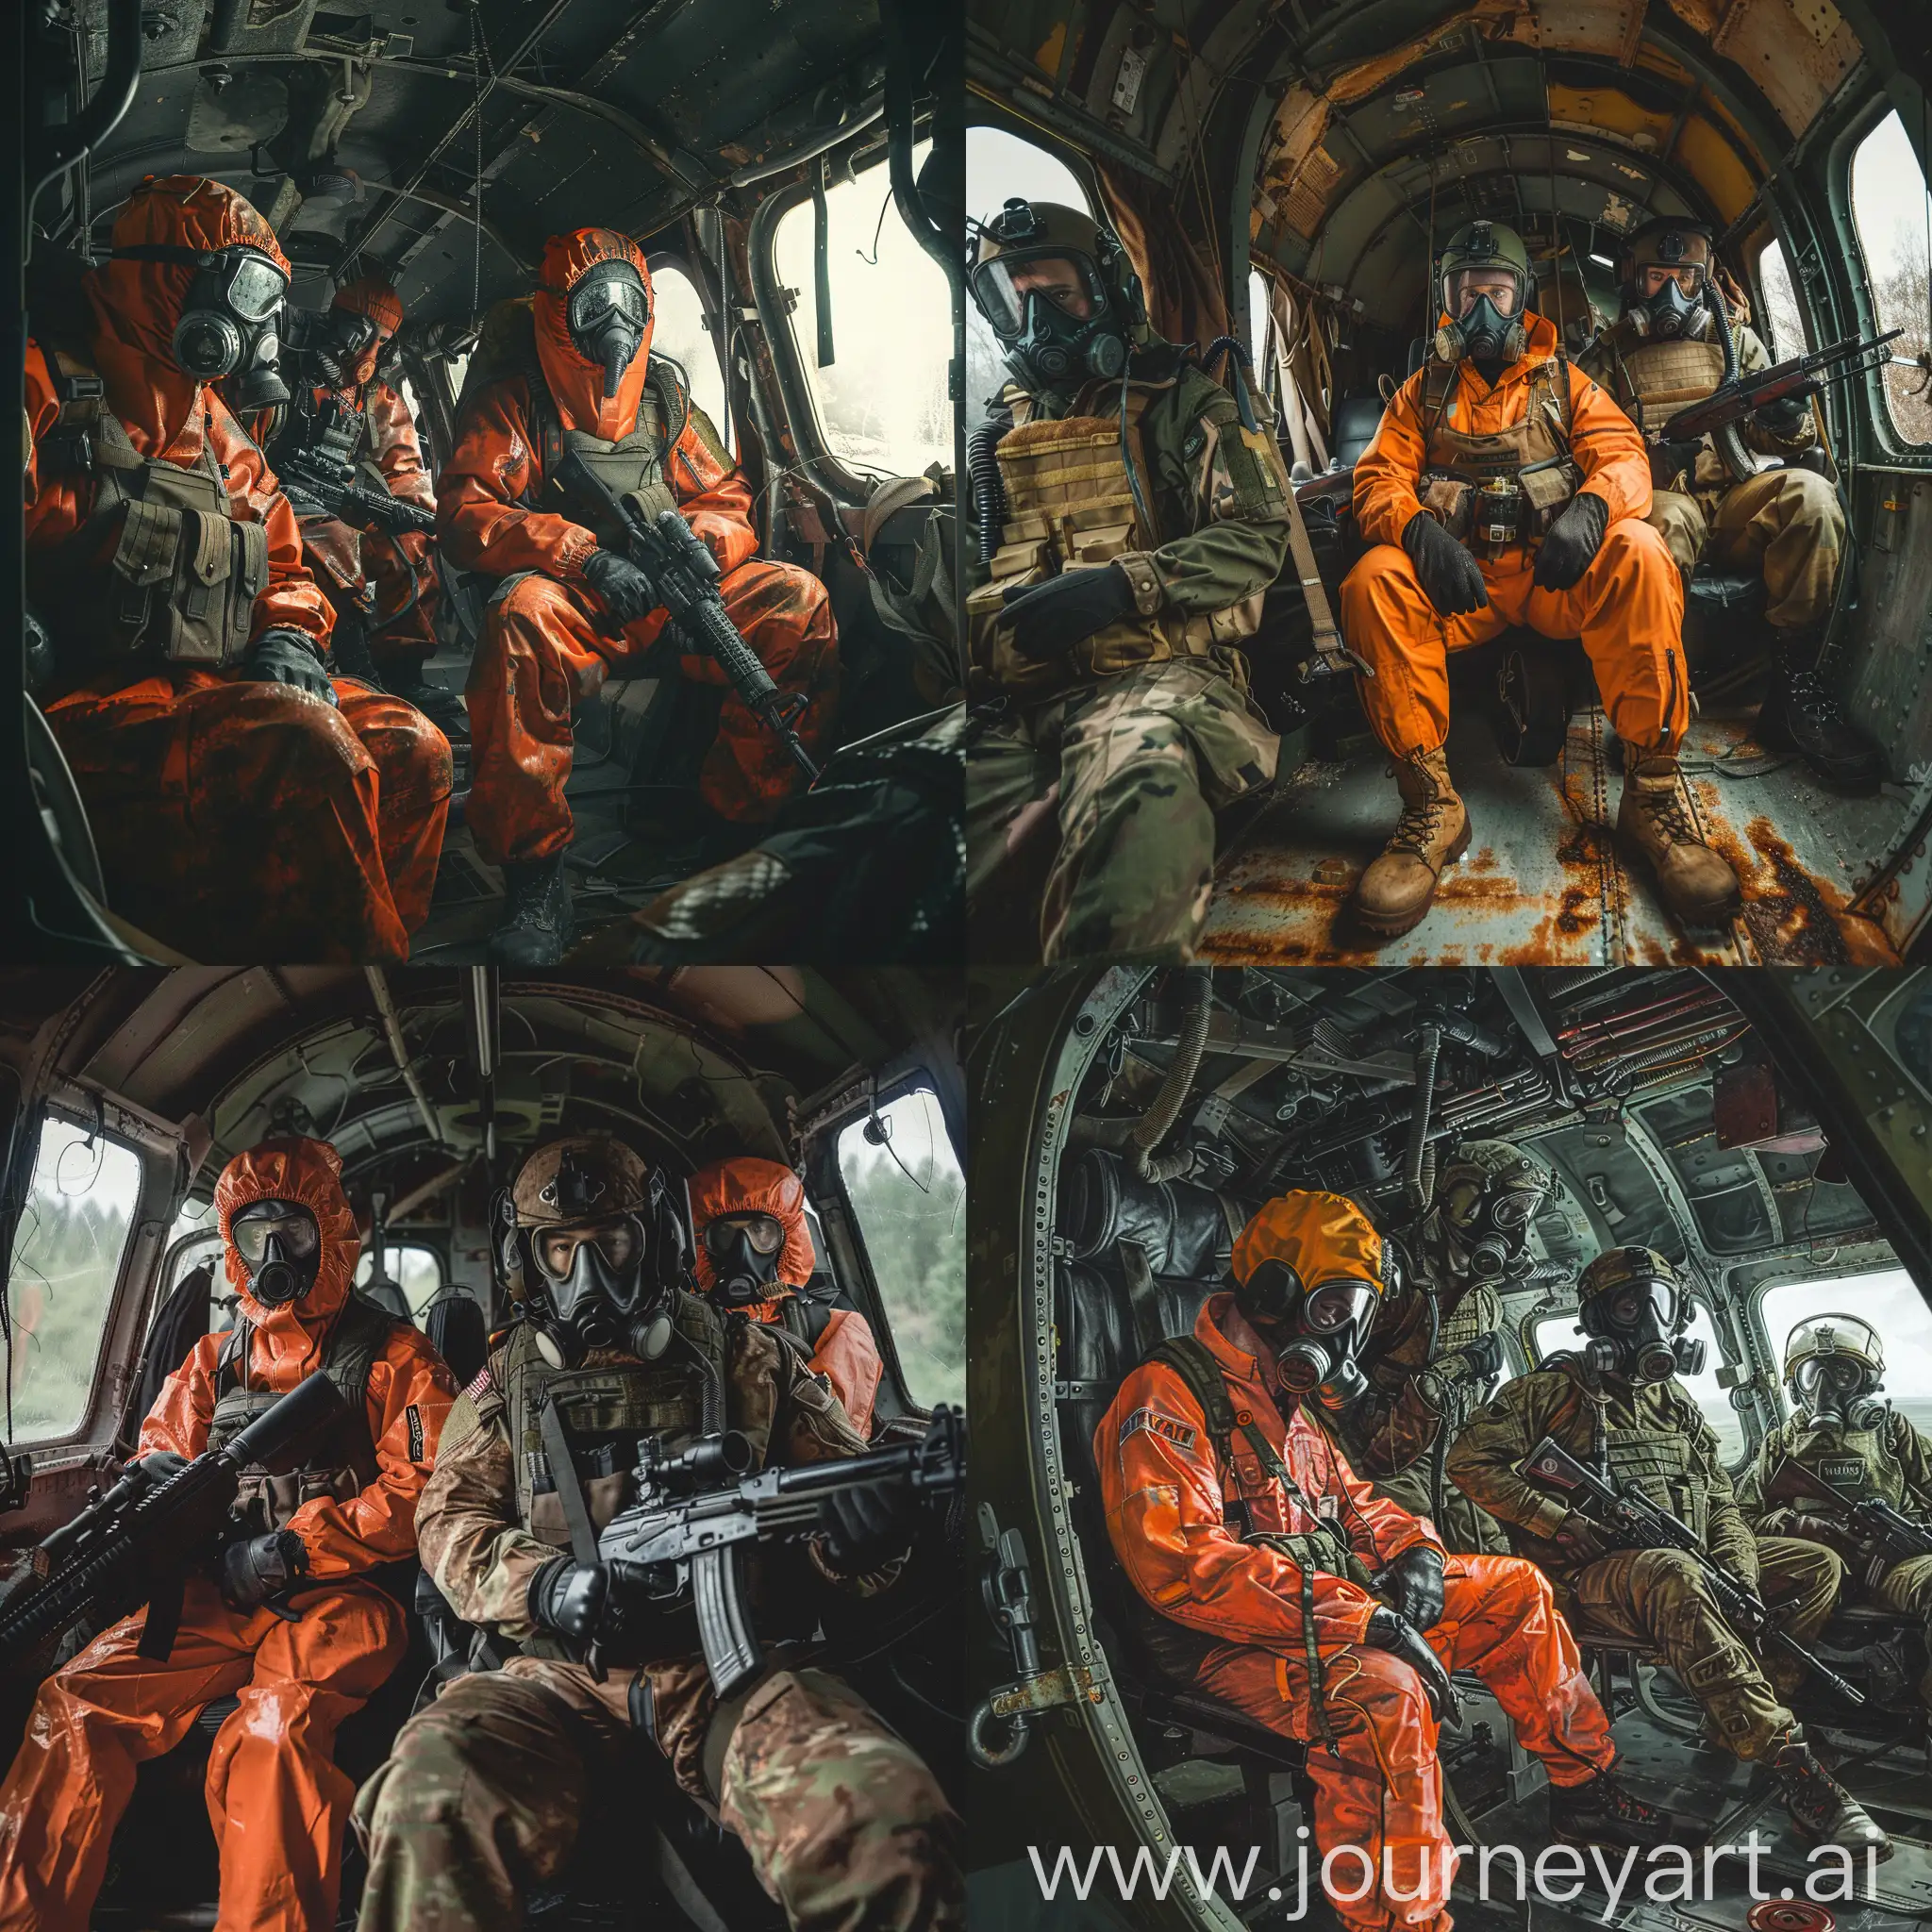 Chernobyl-Exclusion-Zone-Scientist-and-Military-Team-in-Helicopter